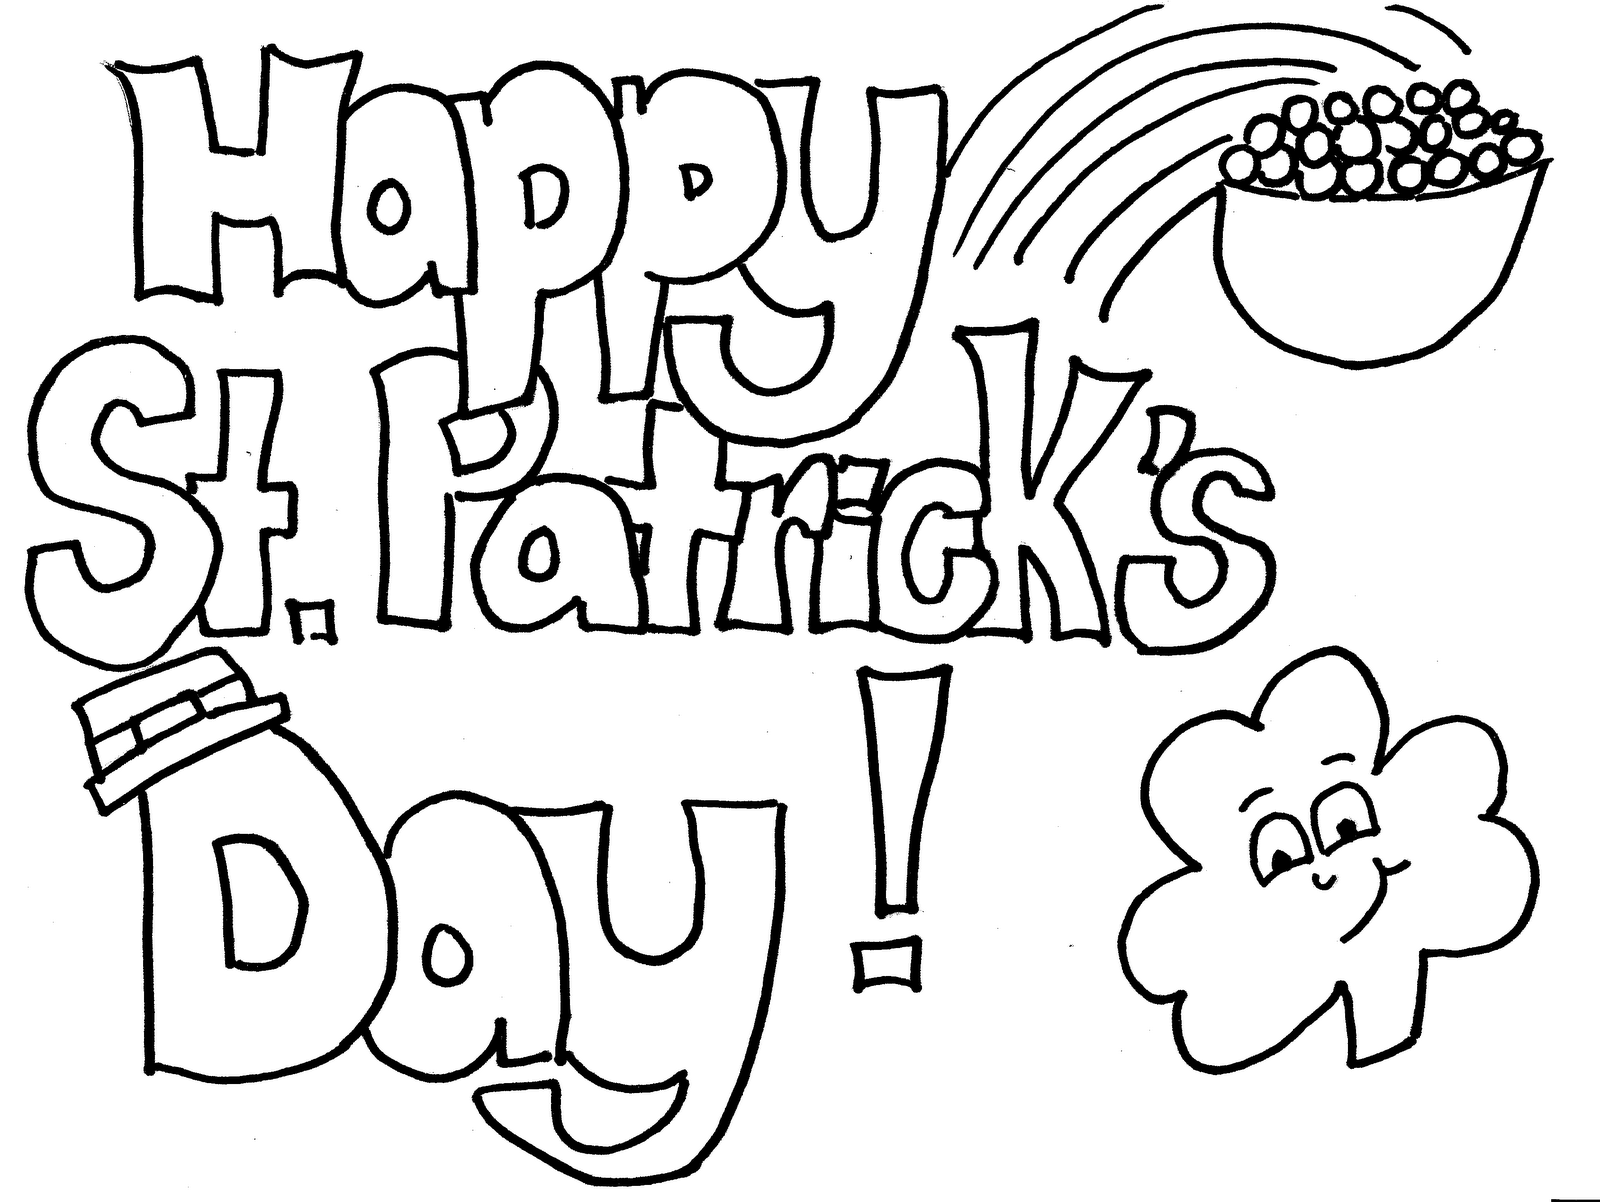 Free Coloring Pictures | Coloring Pages Online for Kids 2014 ...